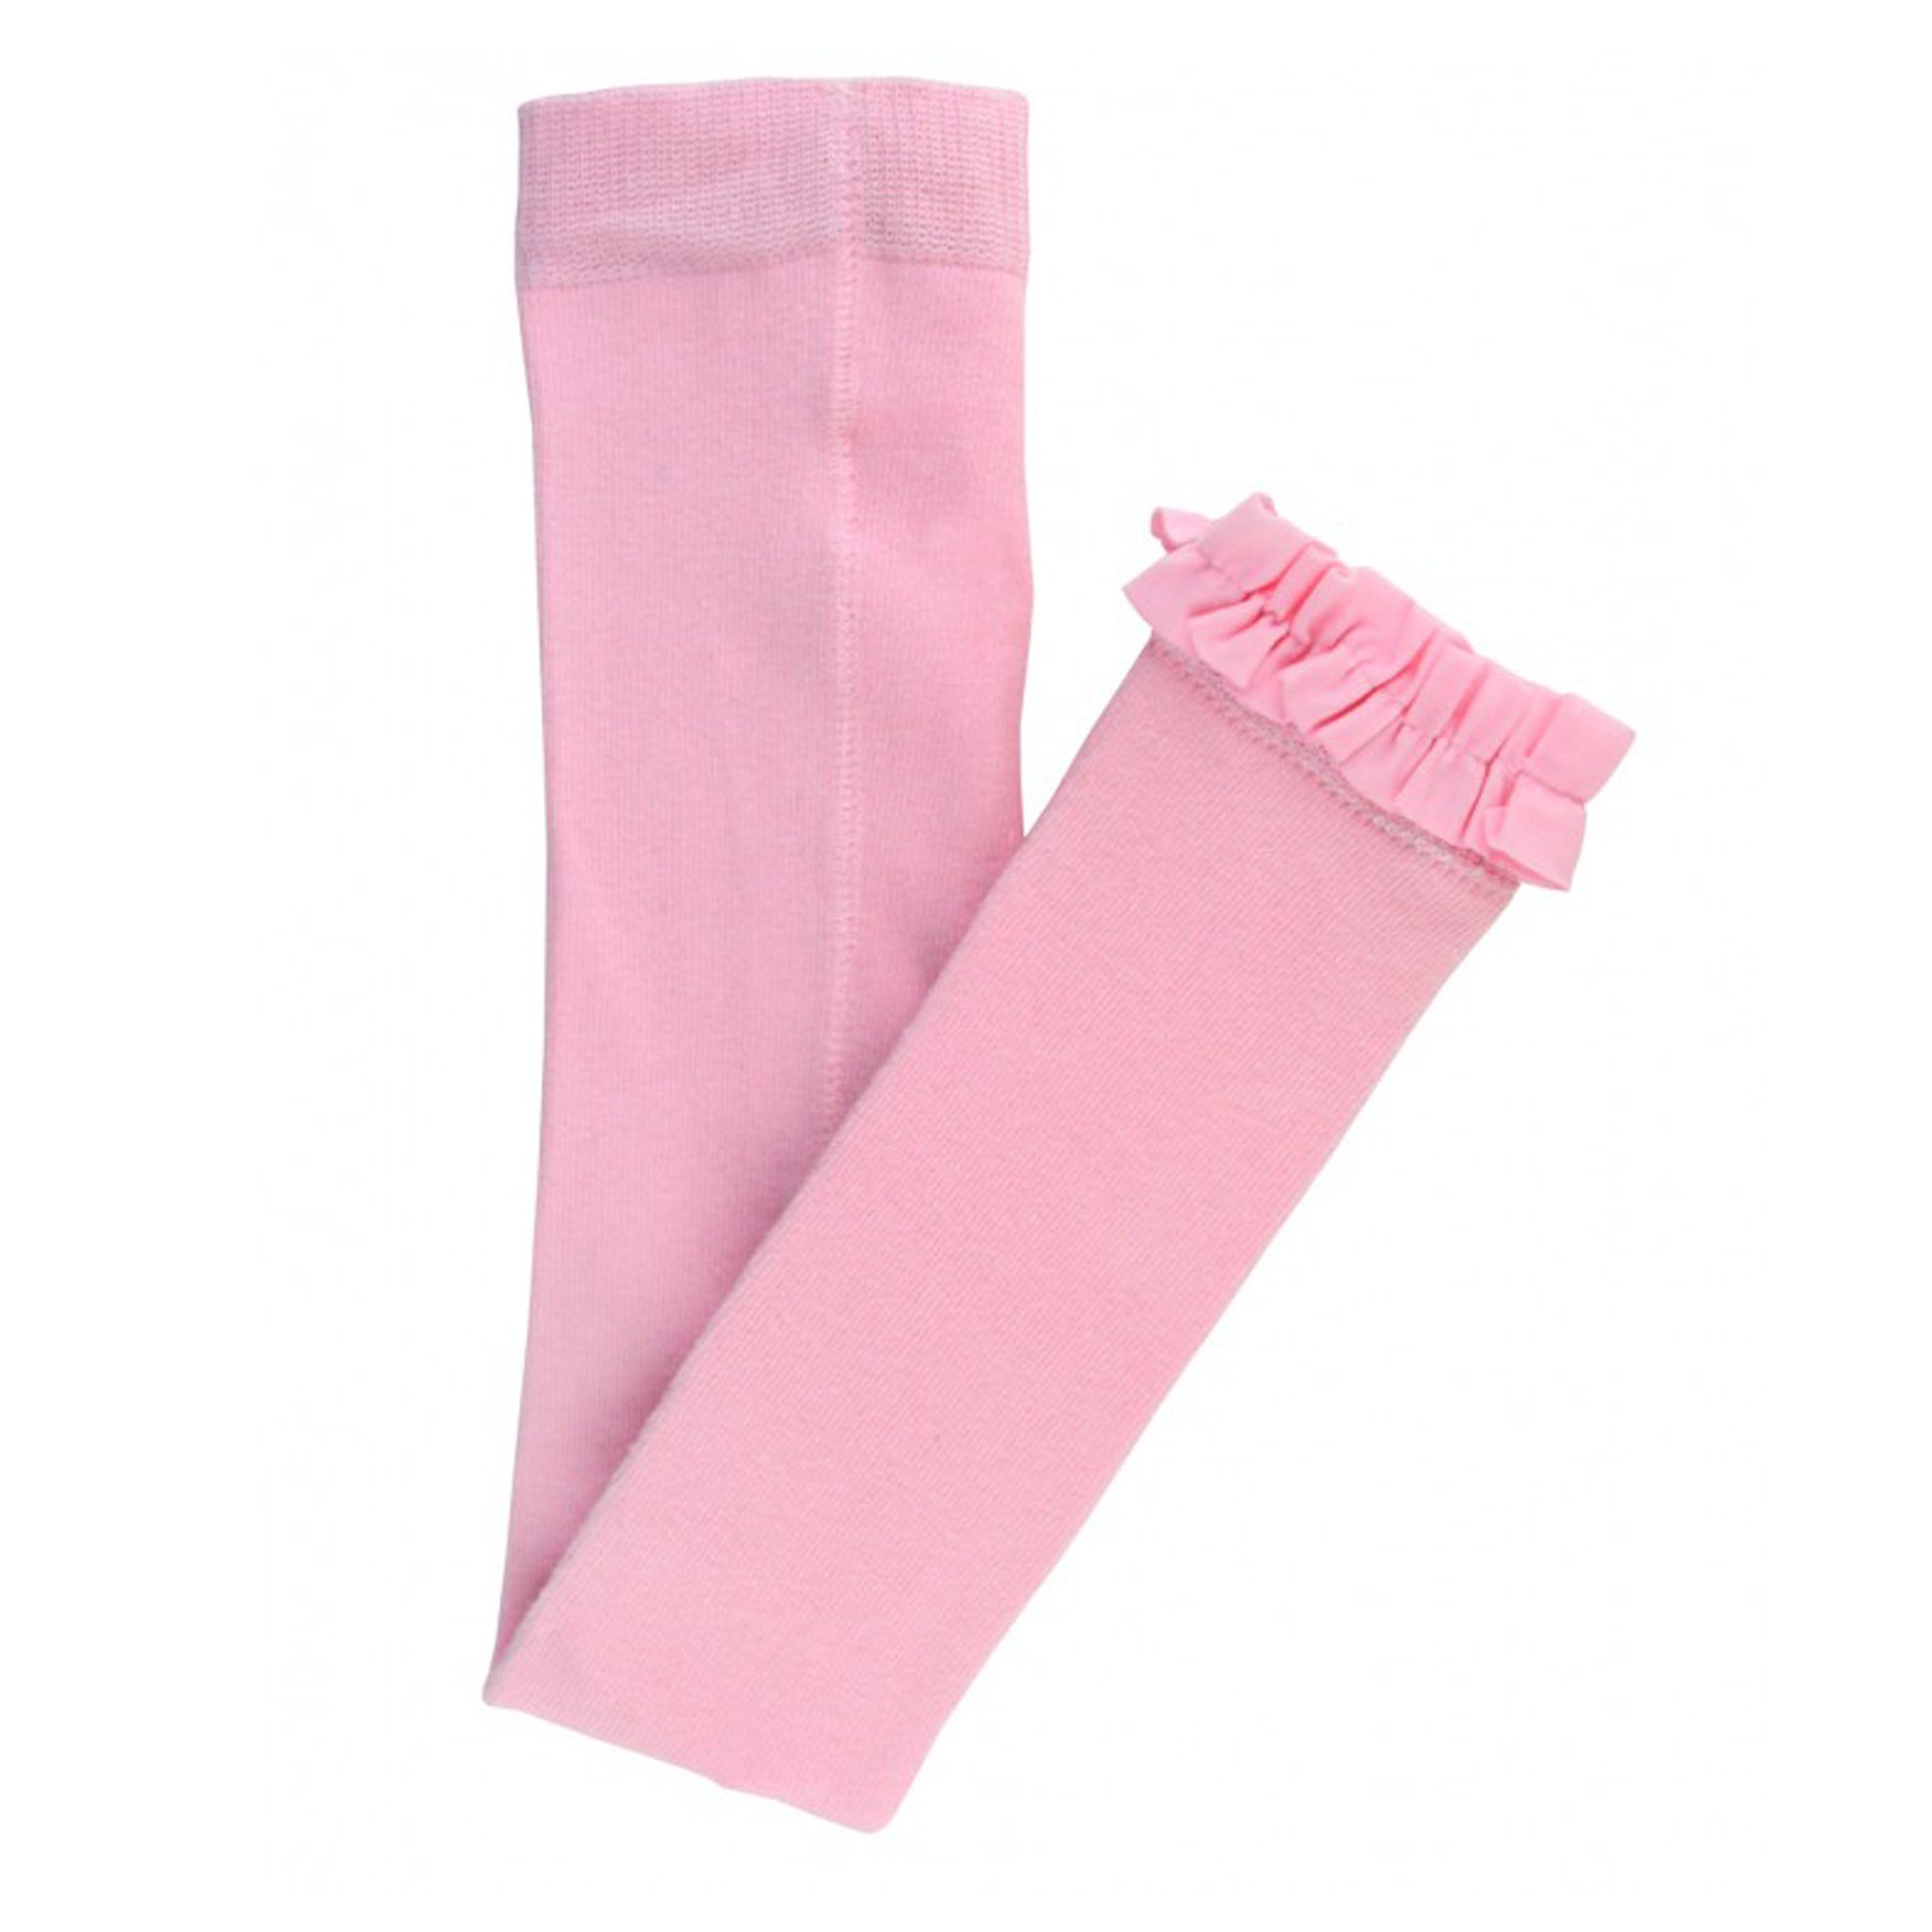 Lilly and Sid Baby Girl's Pale Blue Tights with Pink and White Spots 